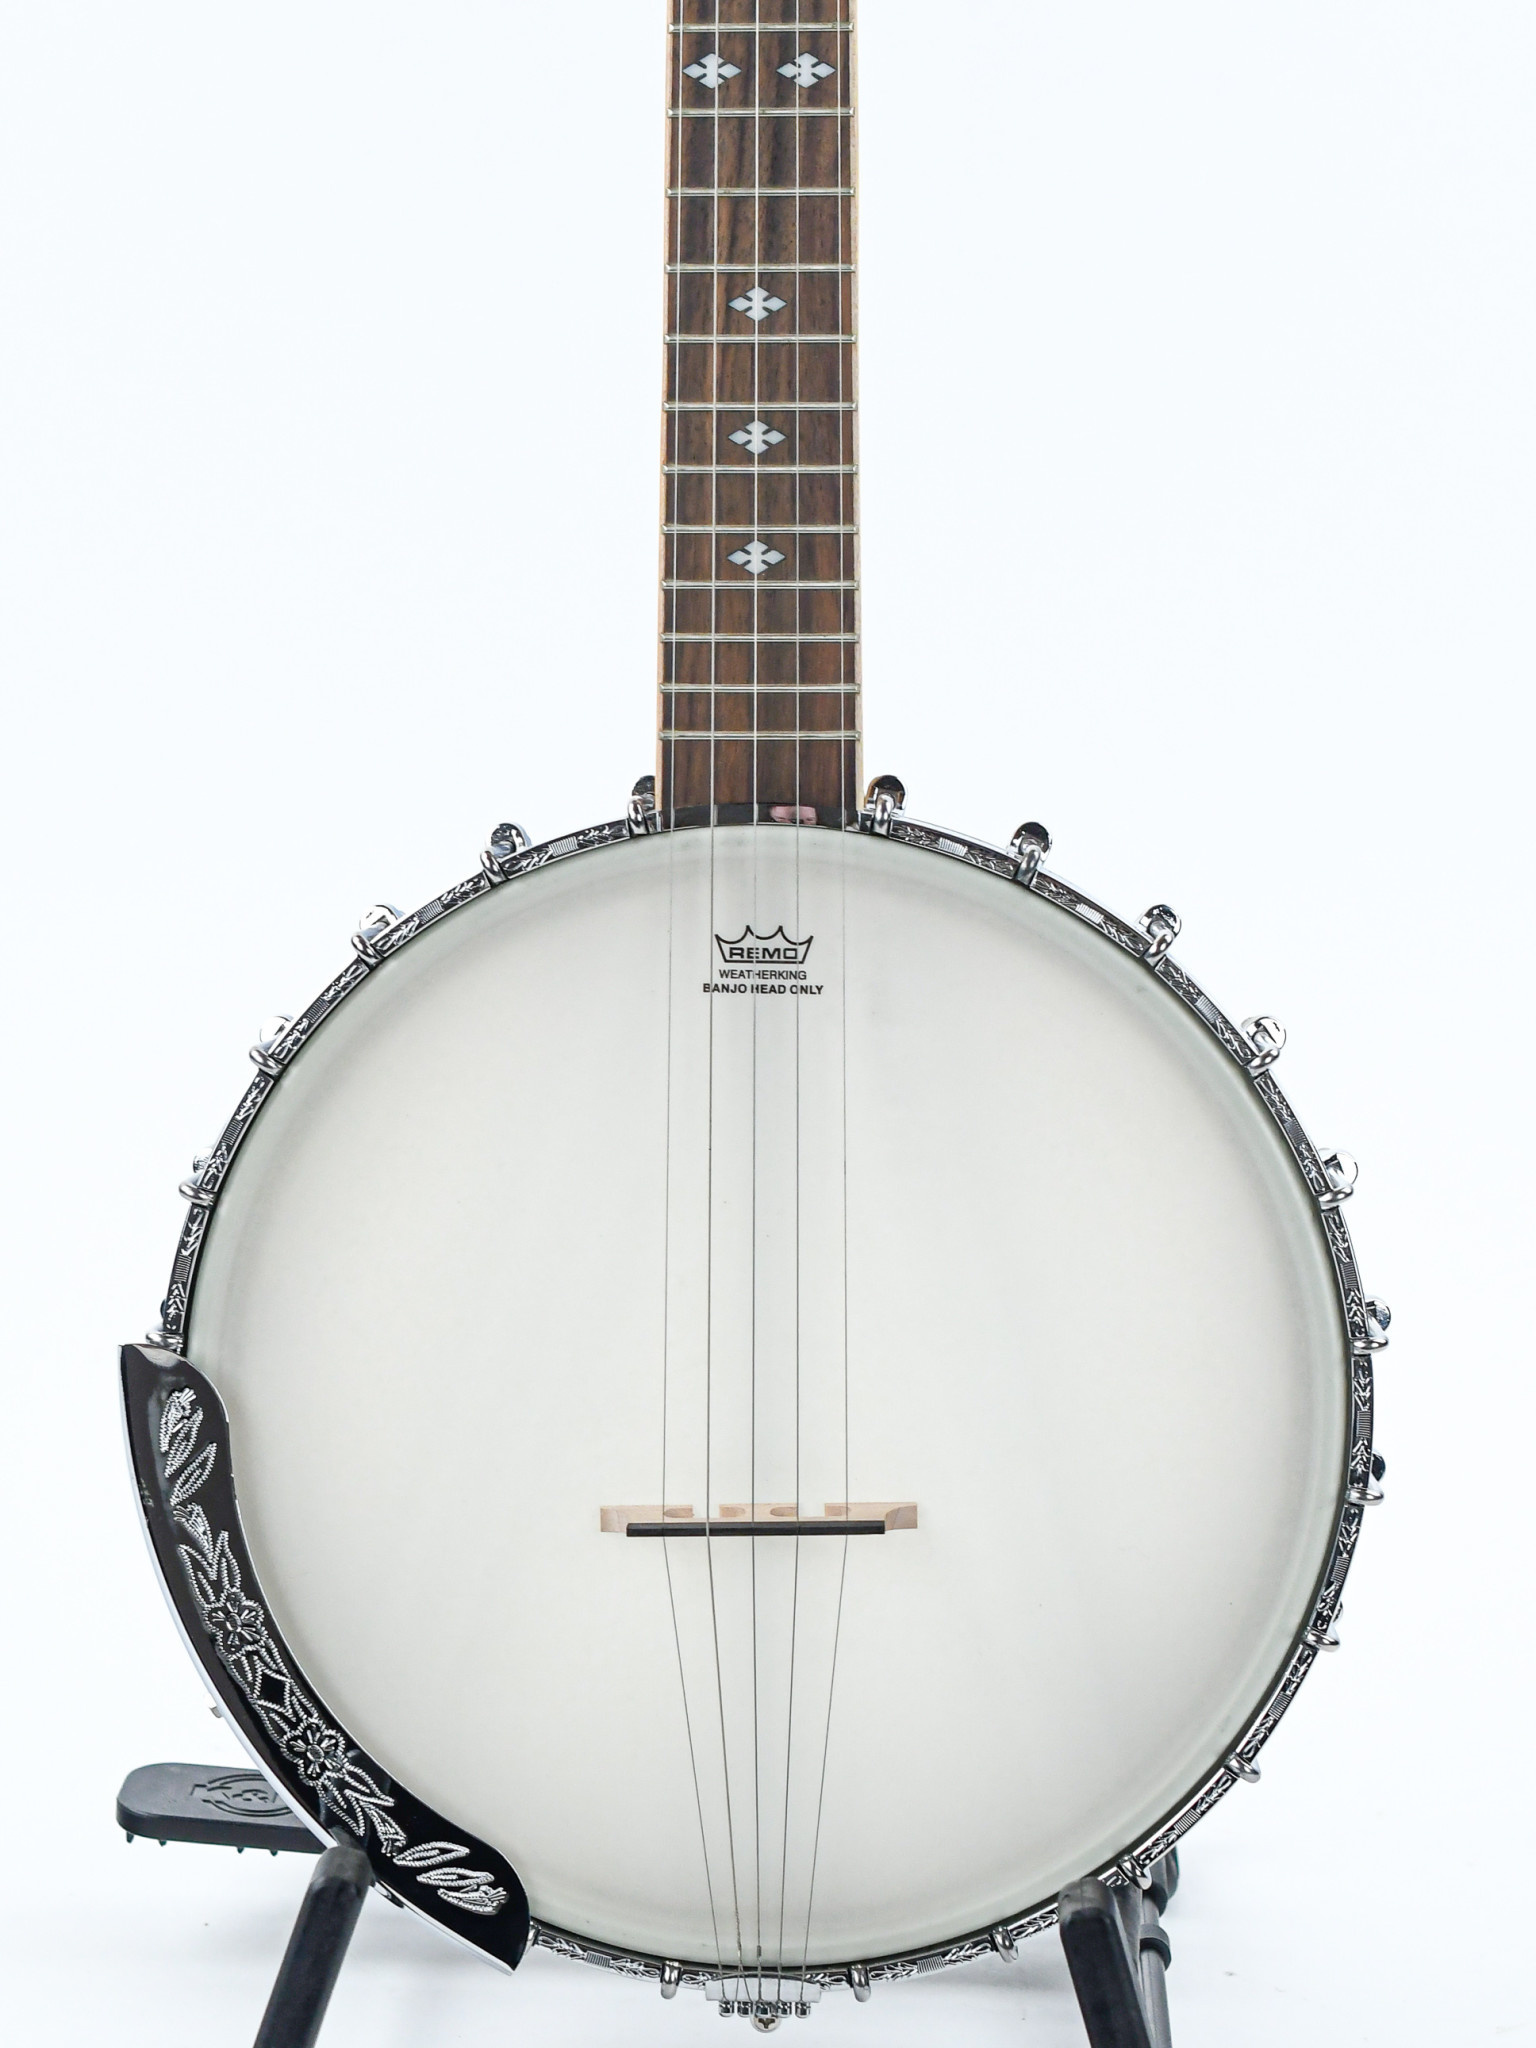 Banjo: Ashbury AB55 Openback, A musical stringed instrument with a round body and a long neck. 1540x2050 HD Background.